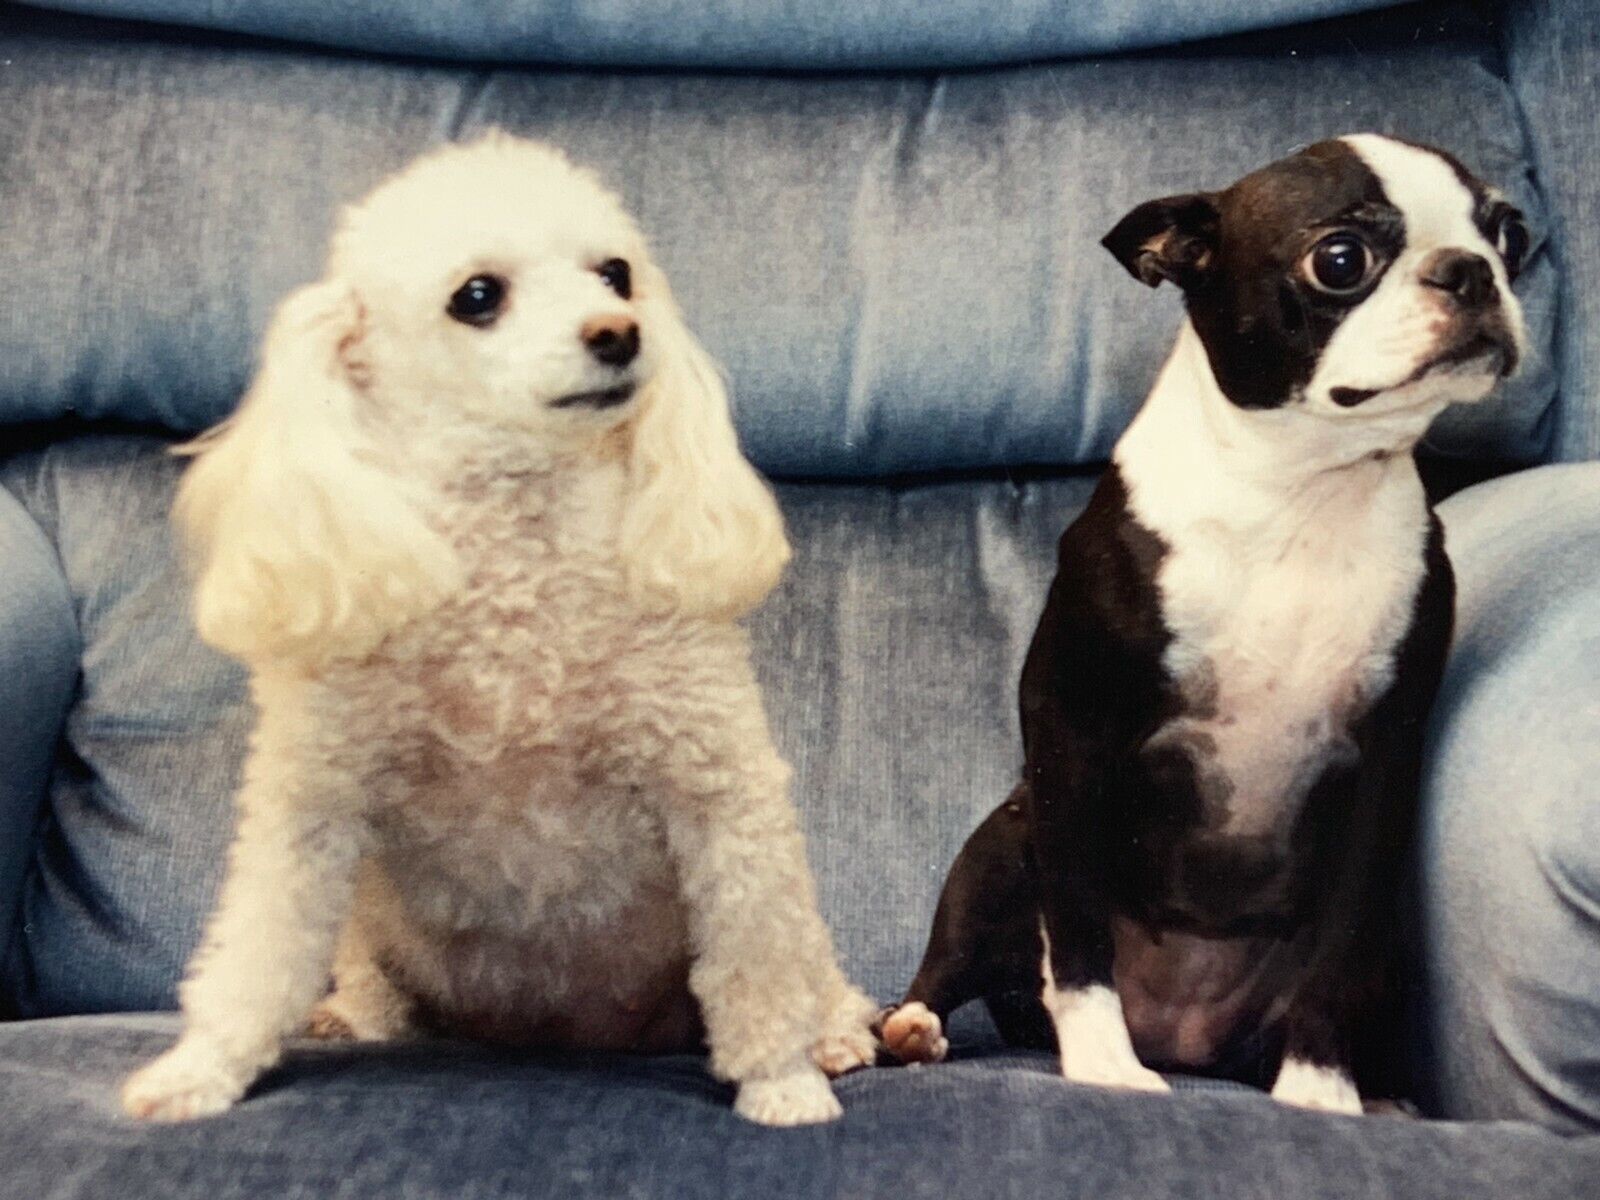 AvG) 4x6 Found Photo Photograph Adorable Boston Terrier And Poodle Sharing Chair